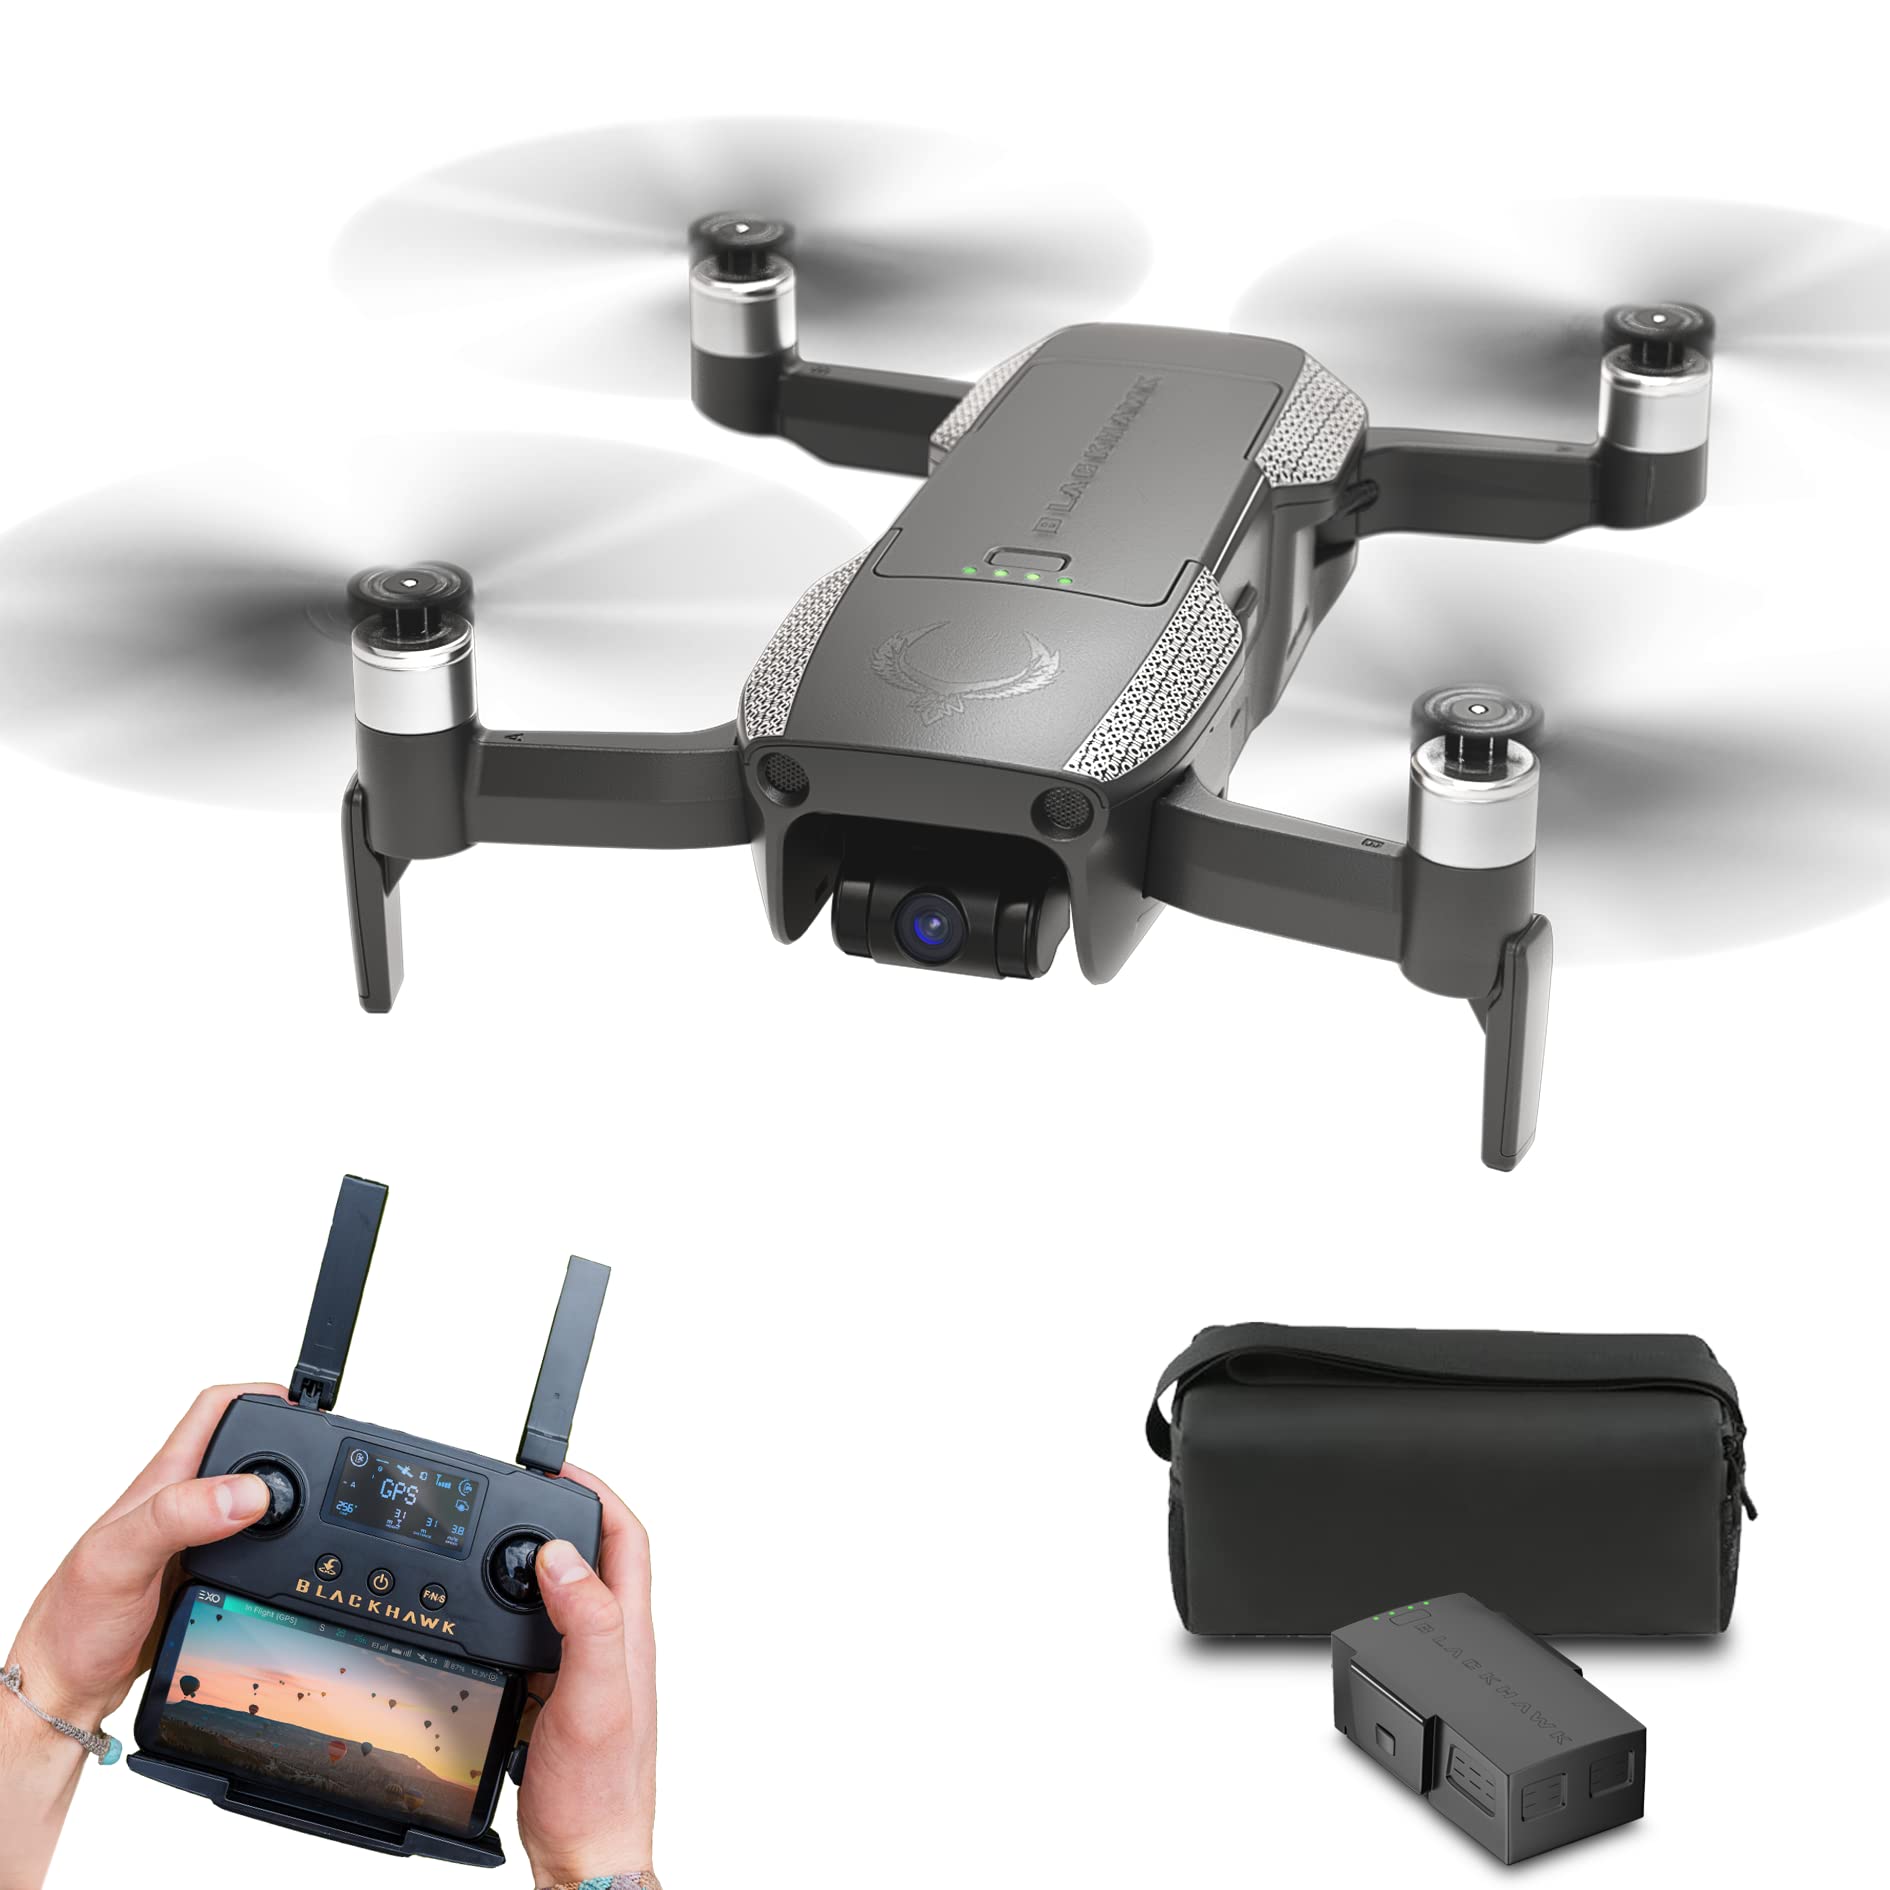 Which Drone Has The Longest Battery Life